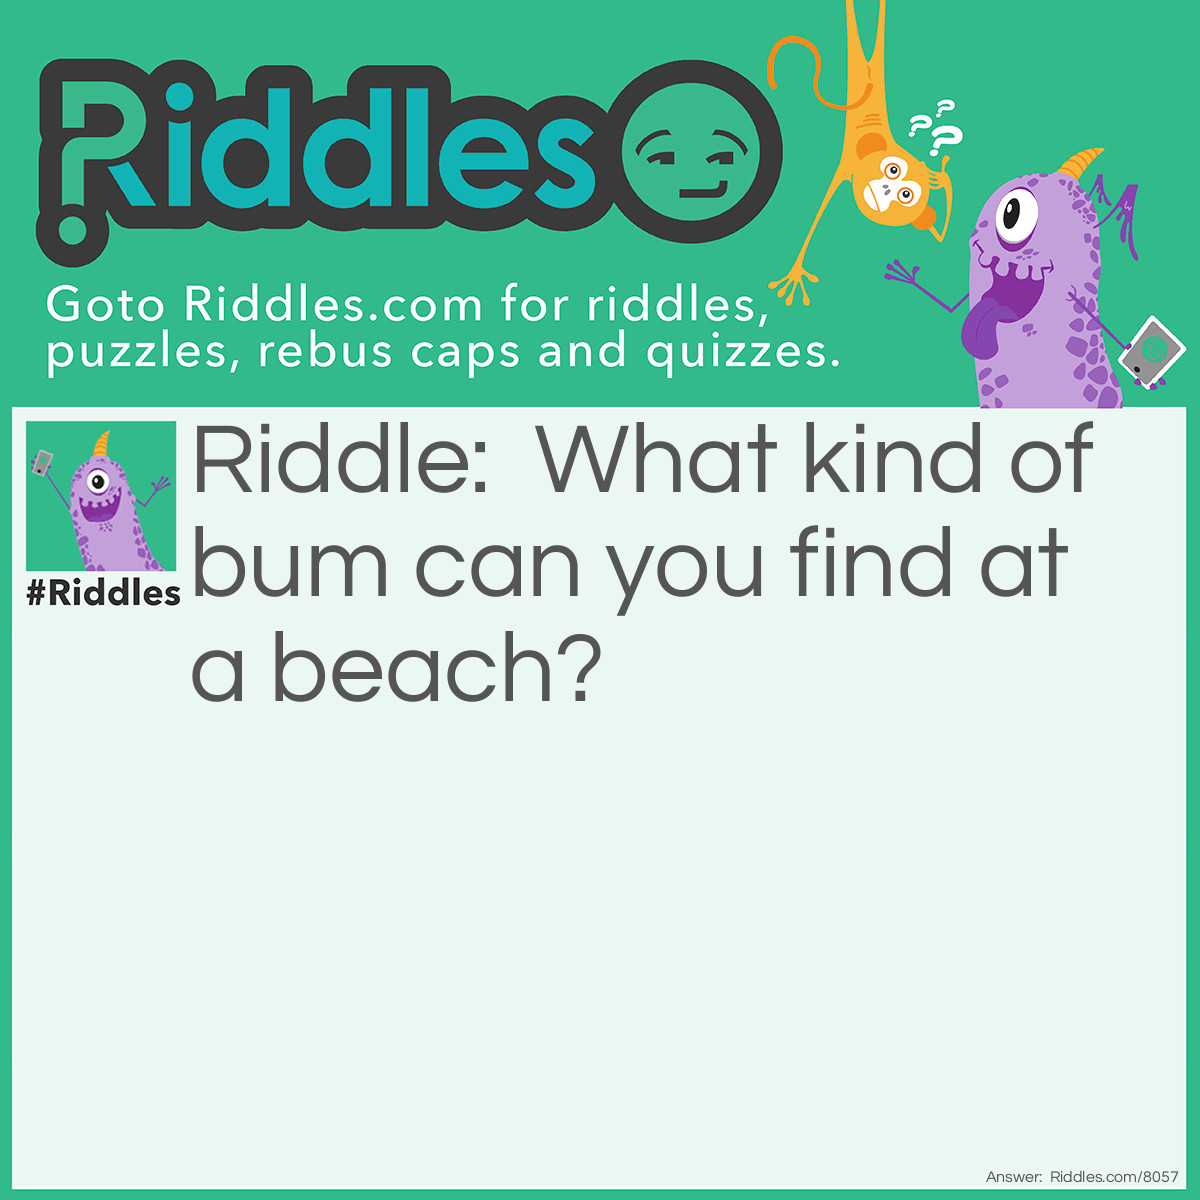 Riddle: What kind of bum can you find at a beach? Answer: A sandy one!